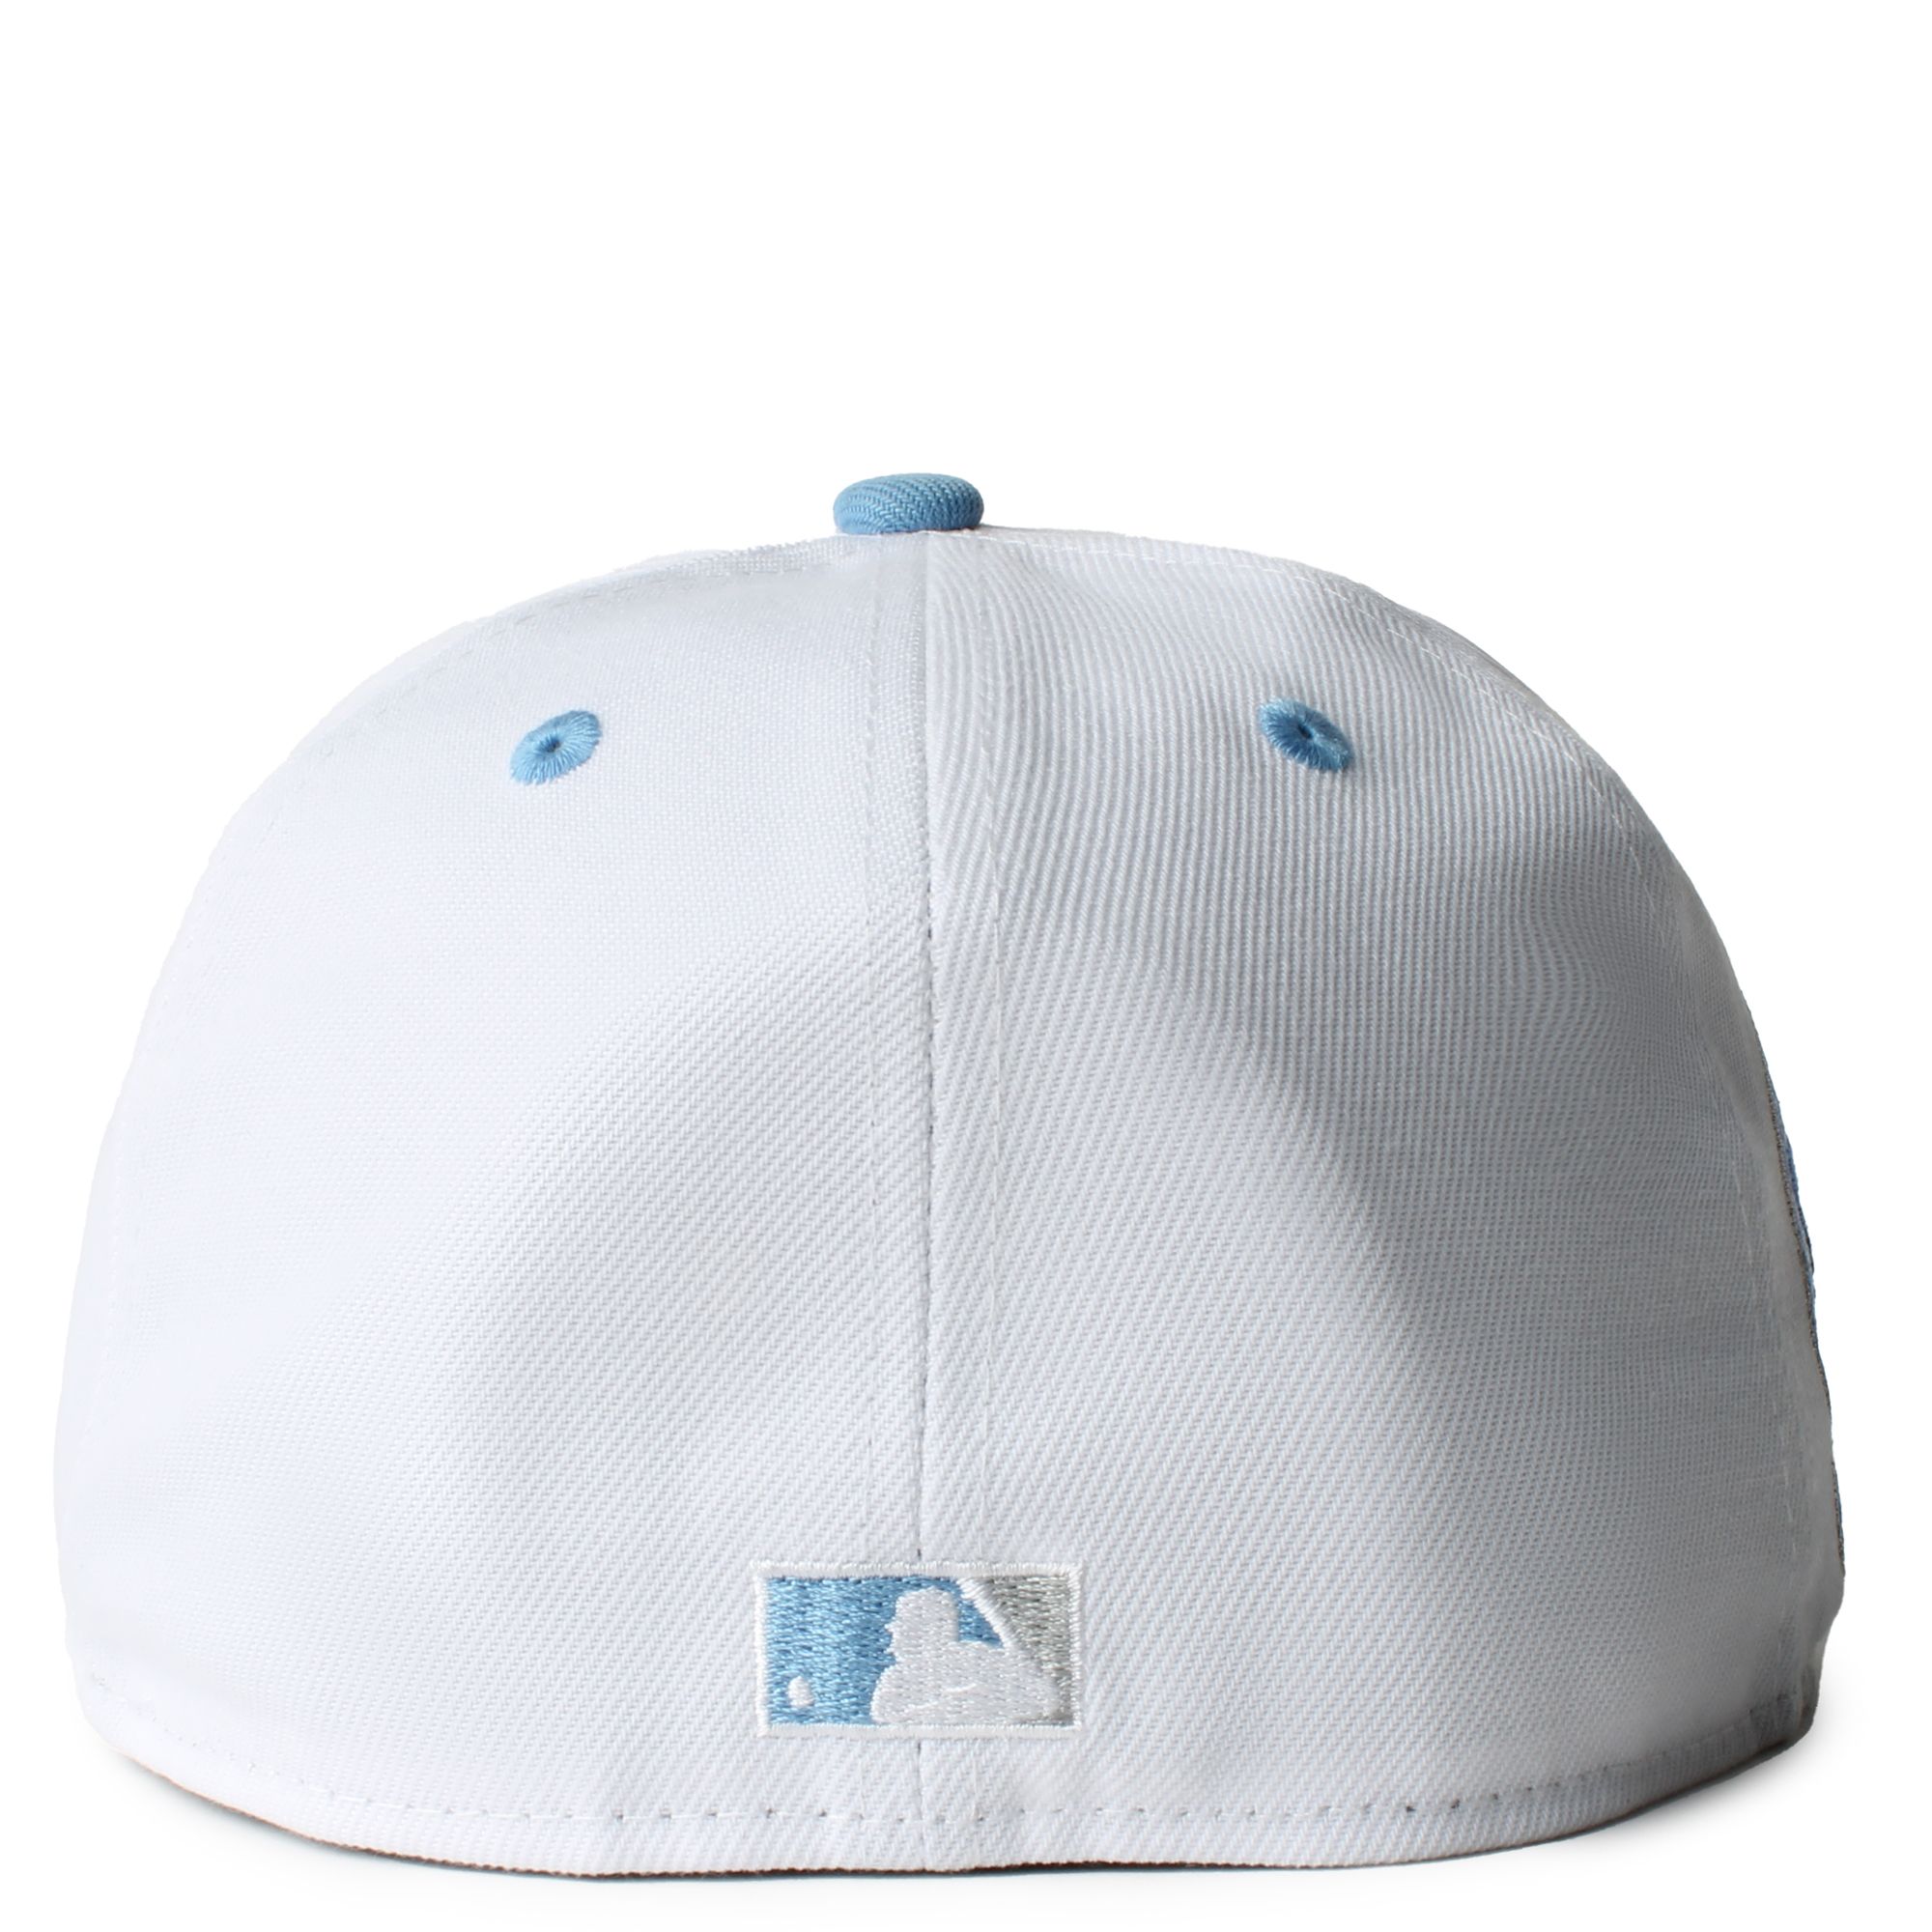 Los Angeles Angels New Era Sky 59FIFTY Fitted Hat - White